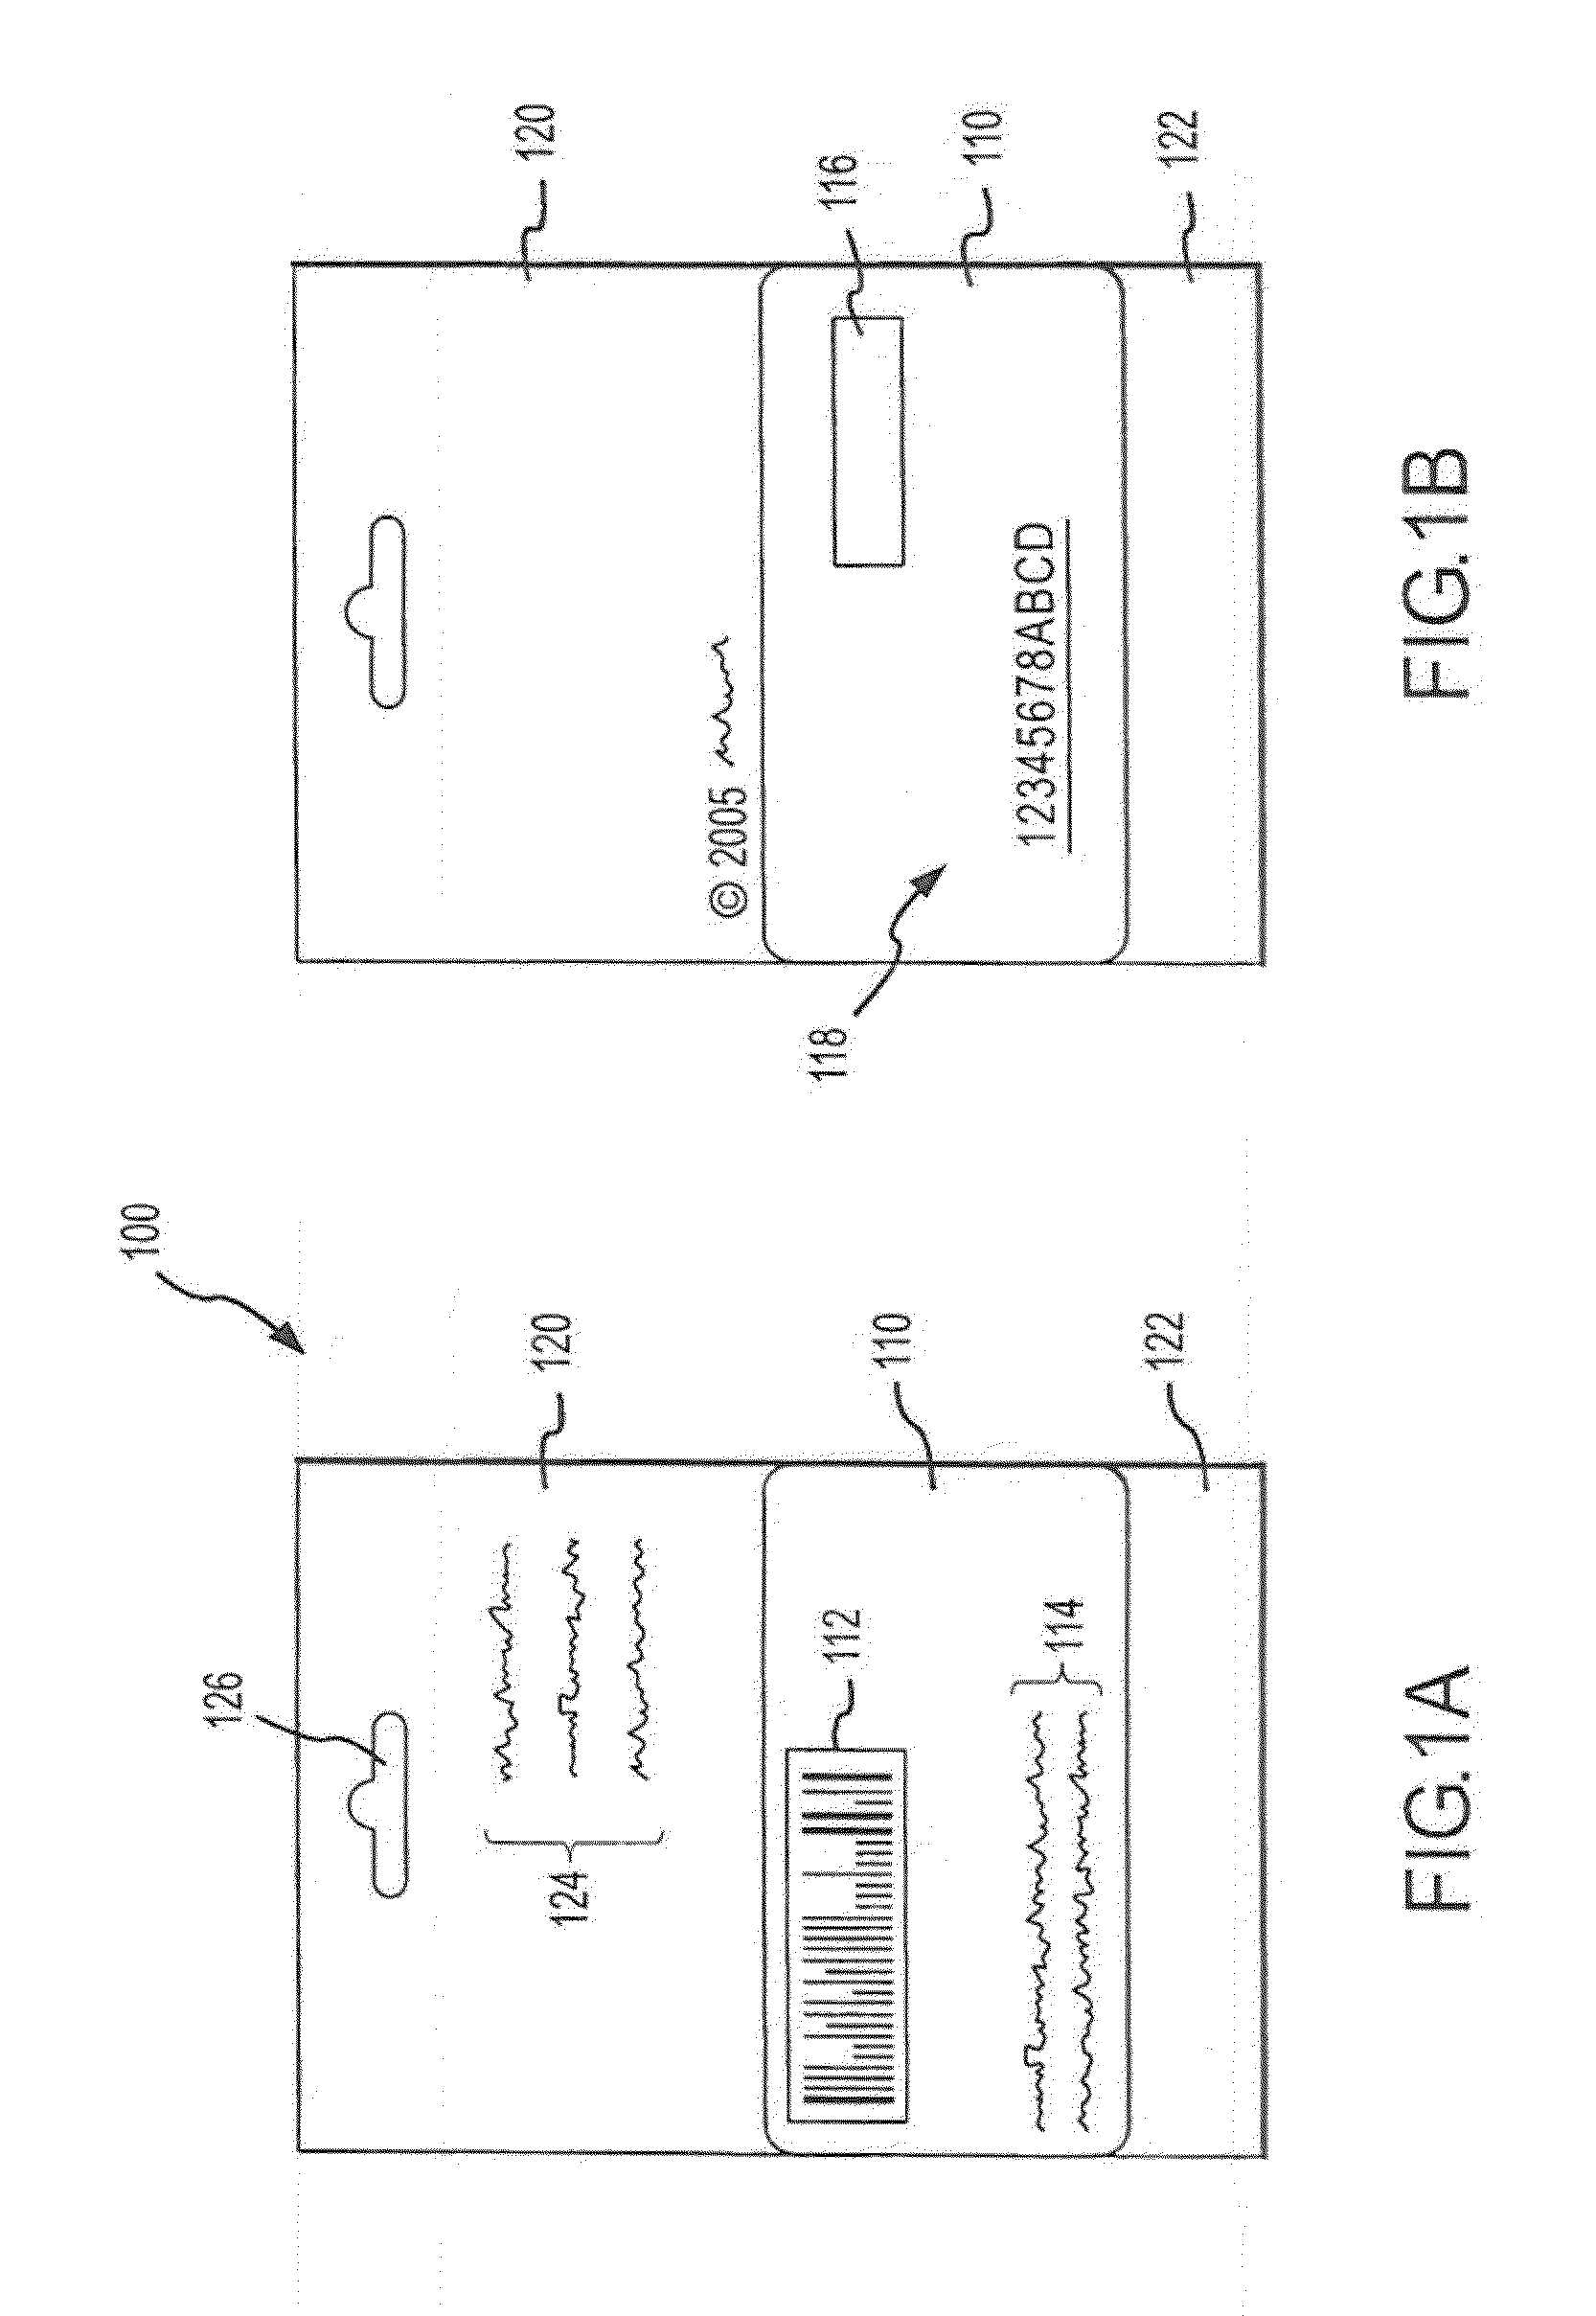 Money transfer systems and methods